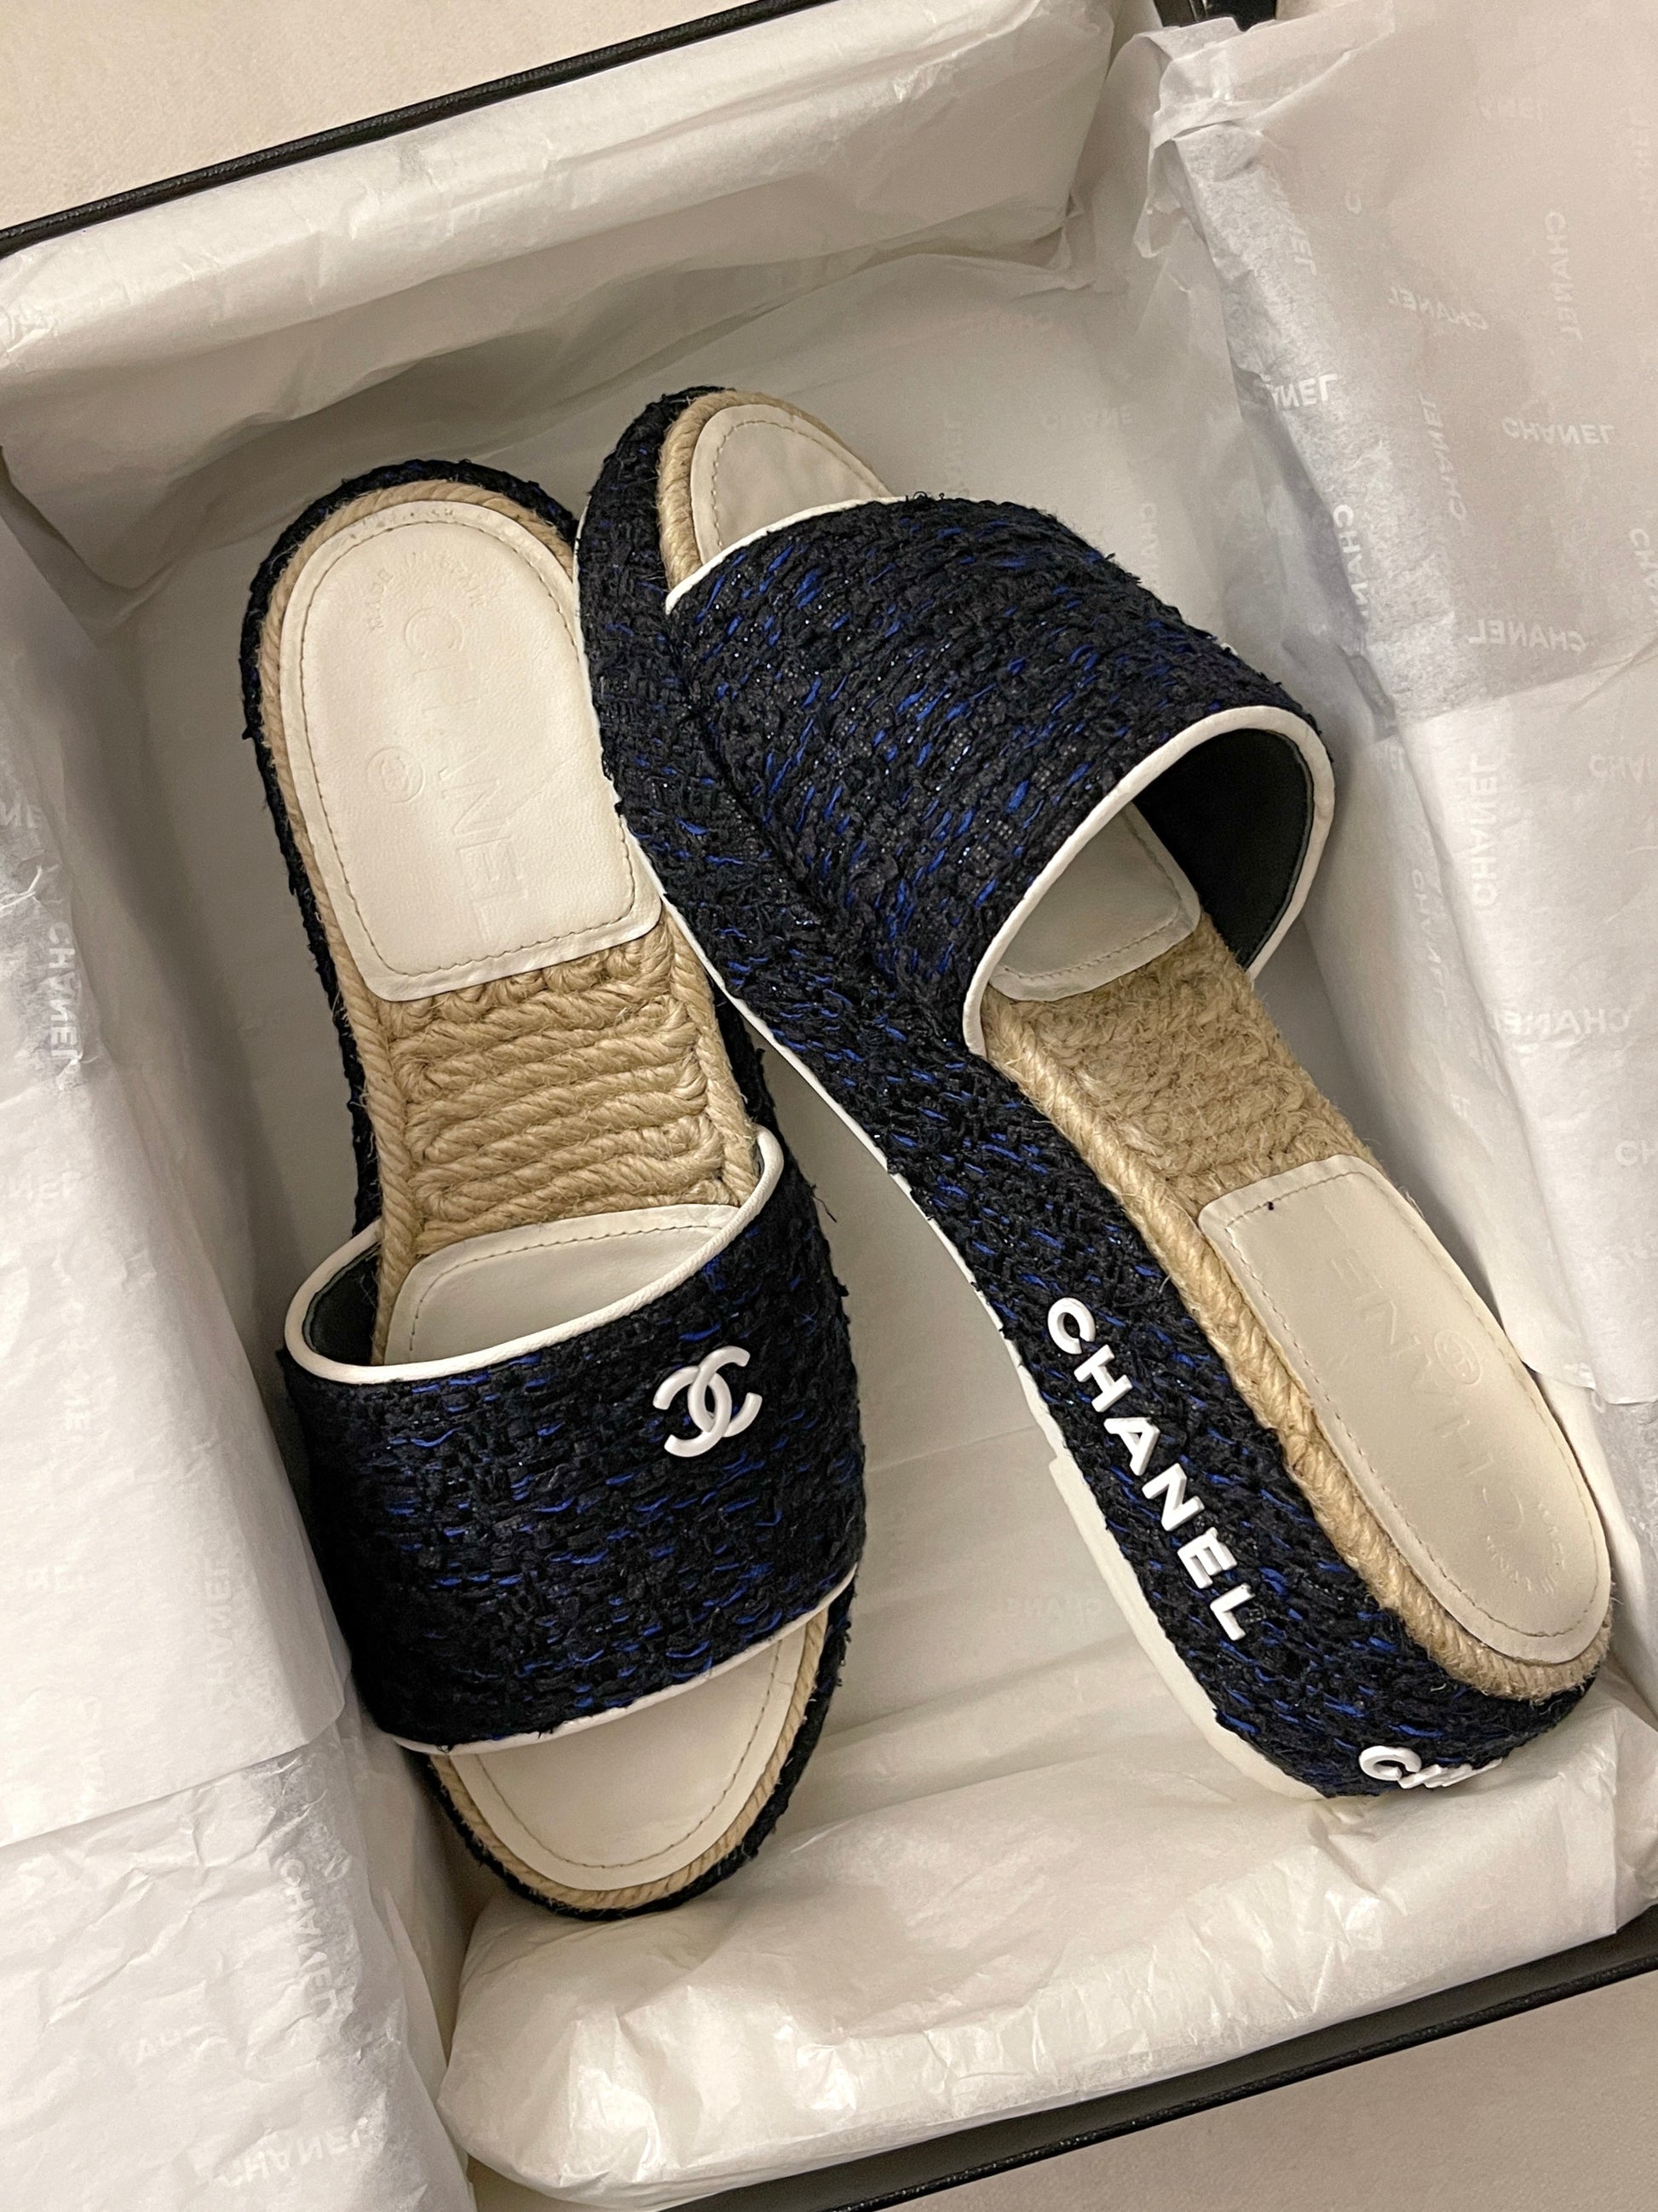 Chanel Open Toe Silver Sandals with CC logo Sz 37